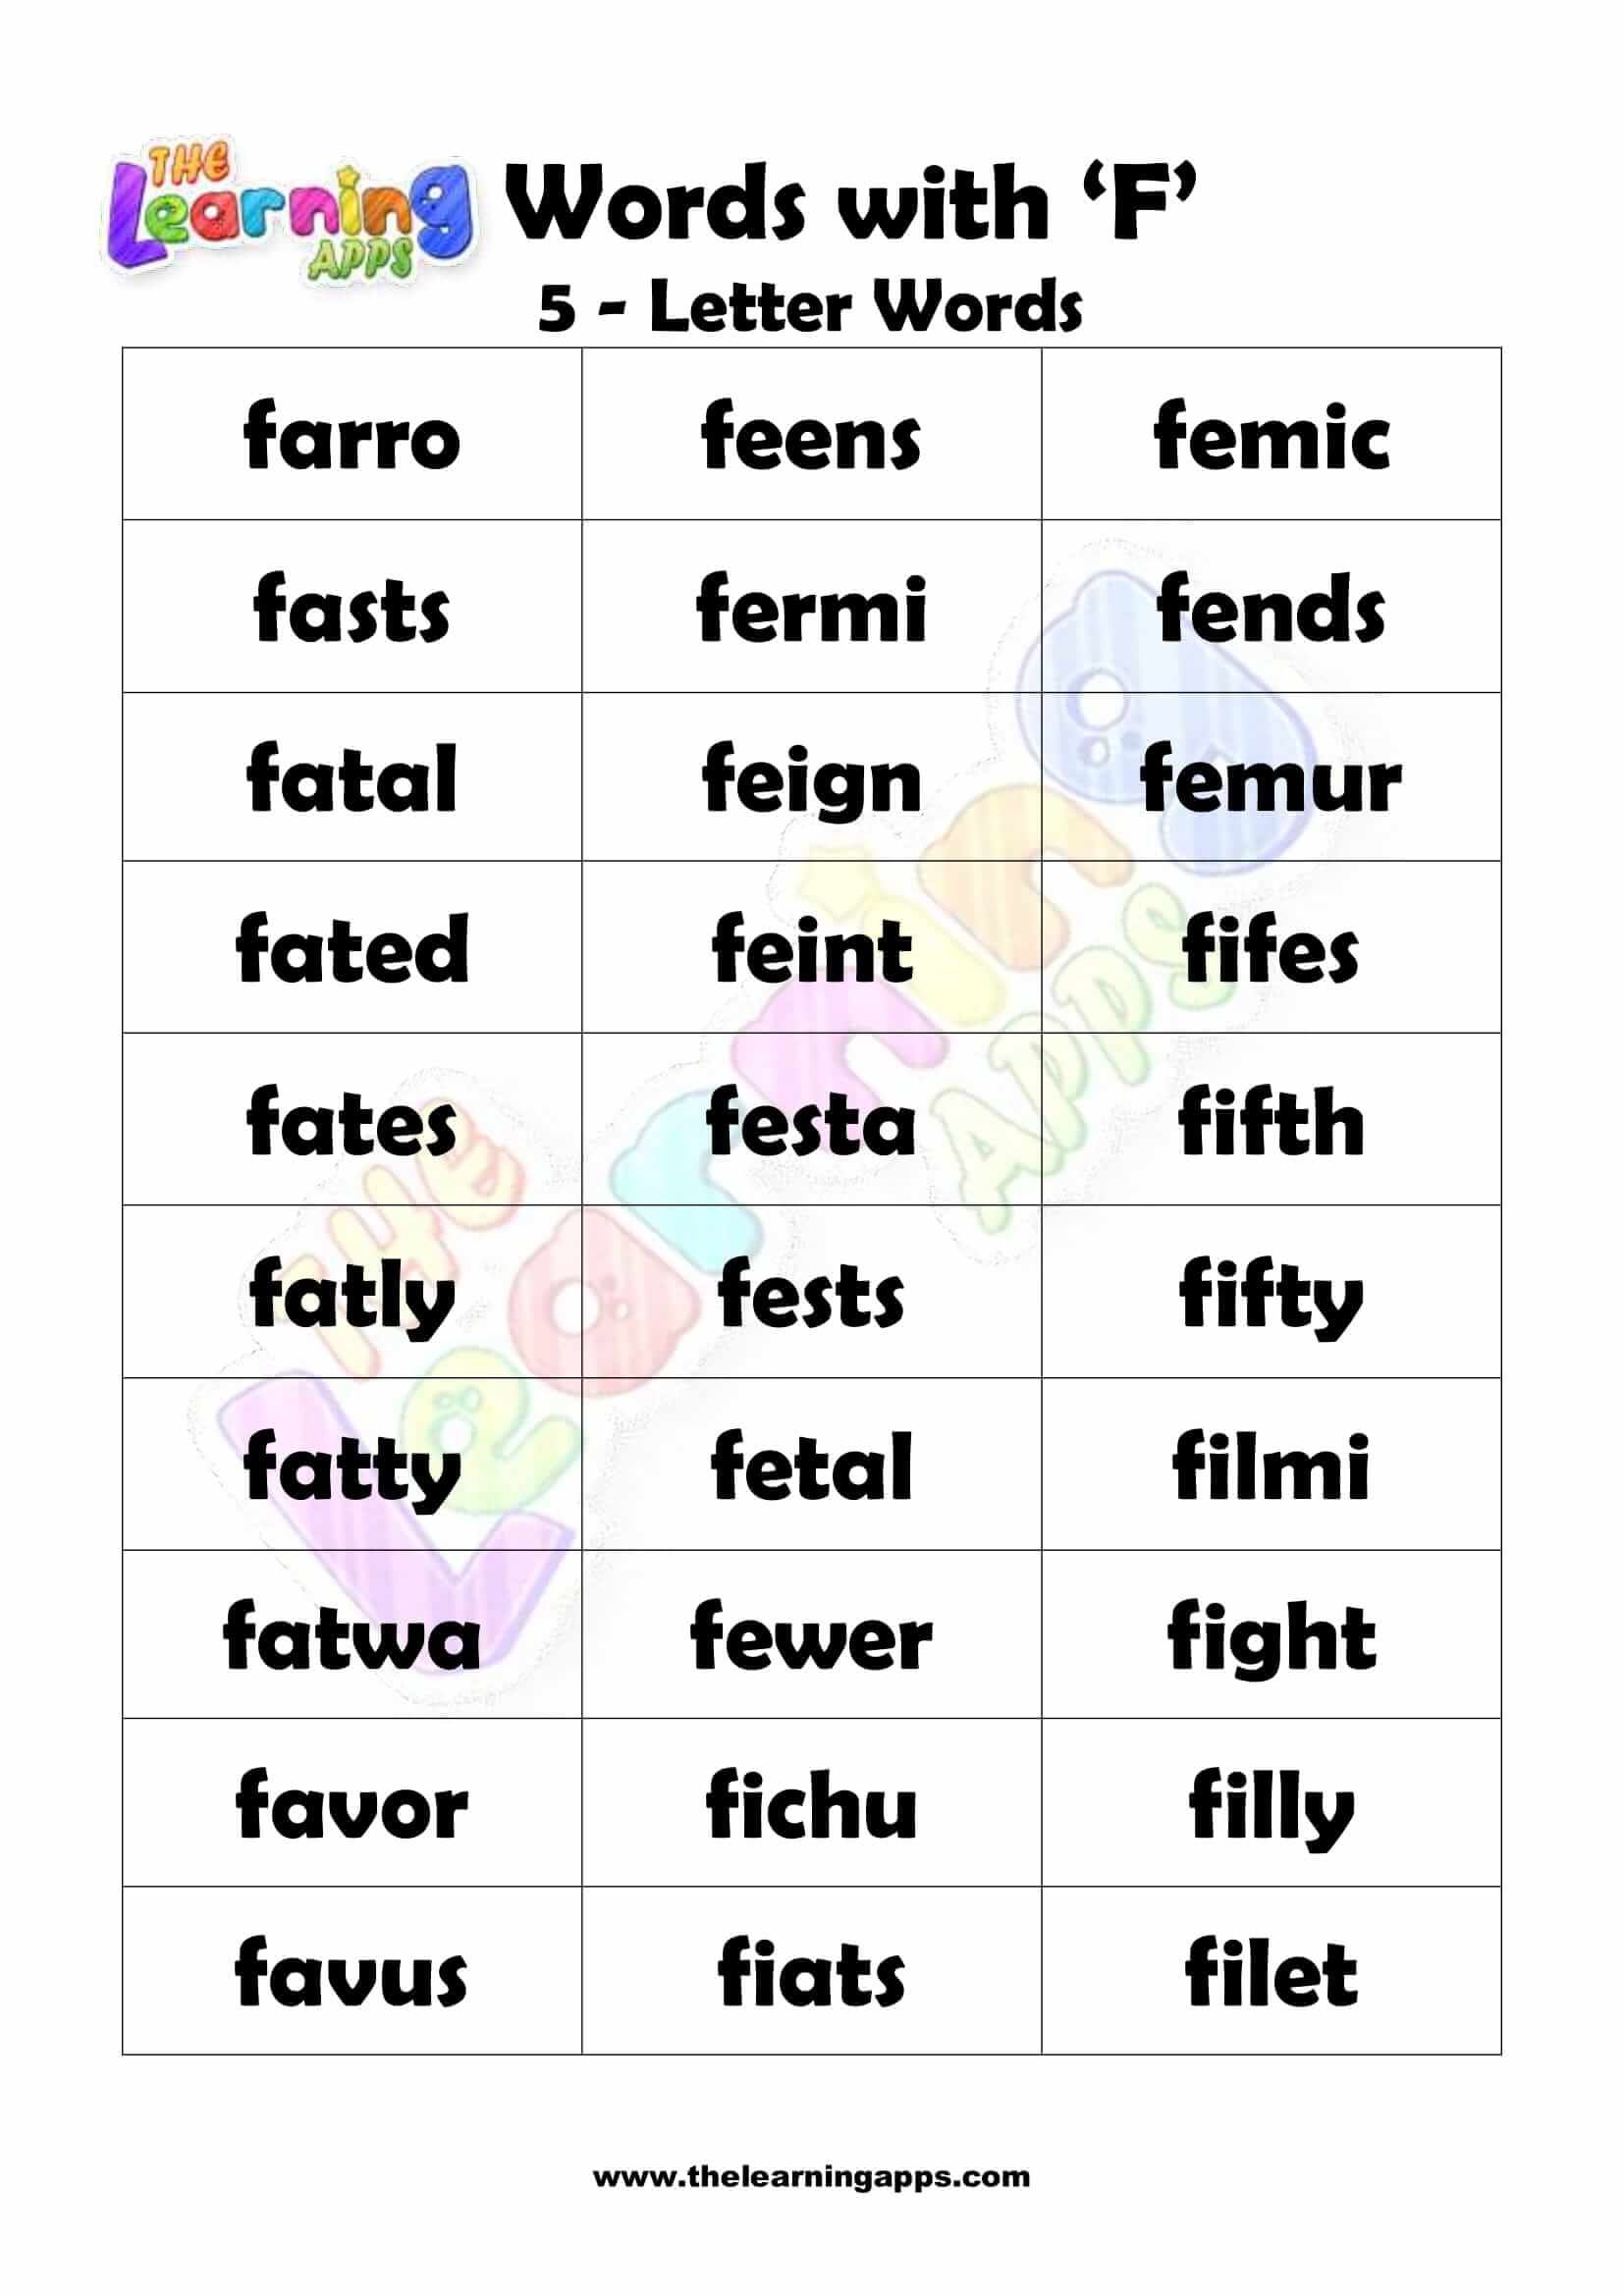 5 LETTER WORD STARTING WITH F-3